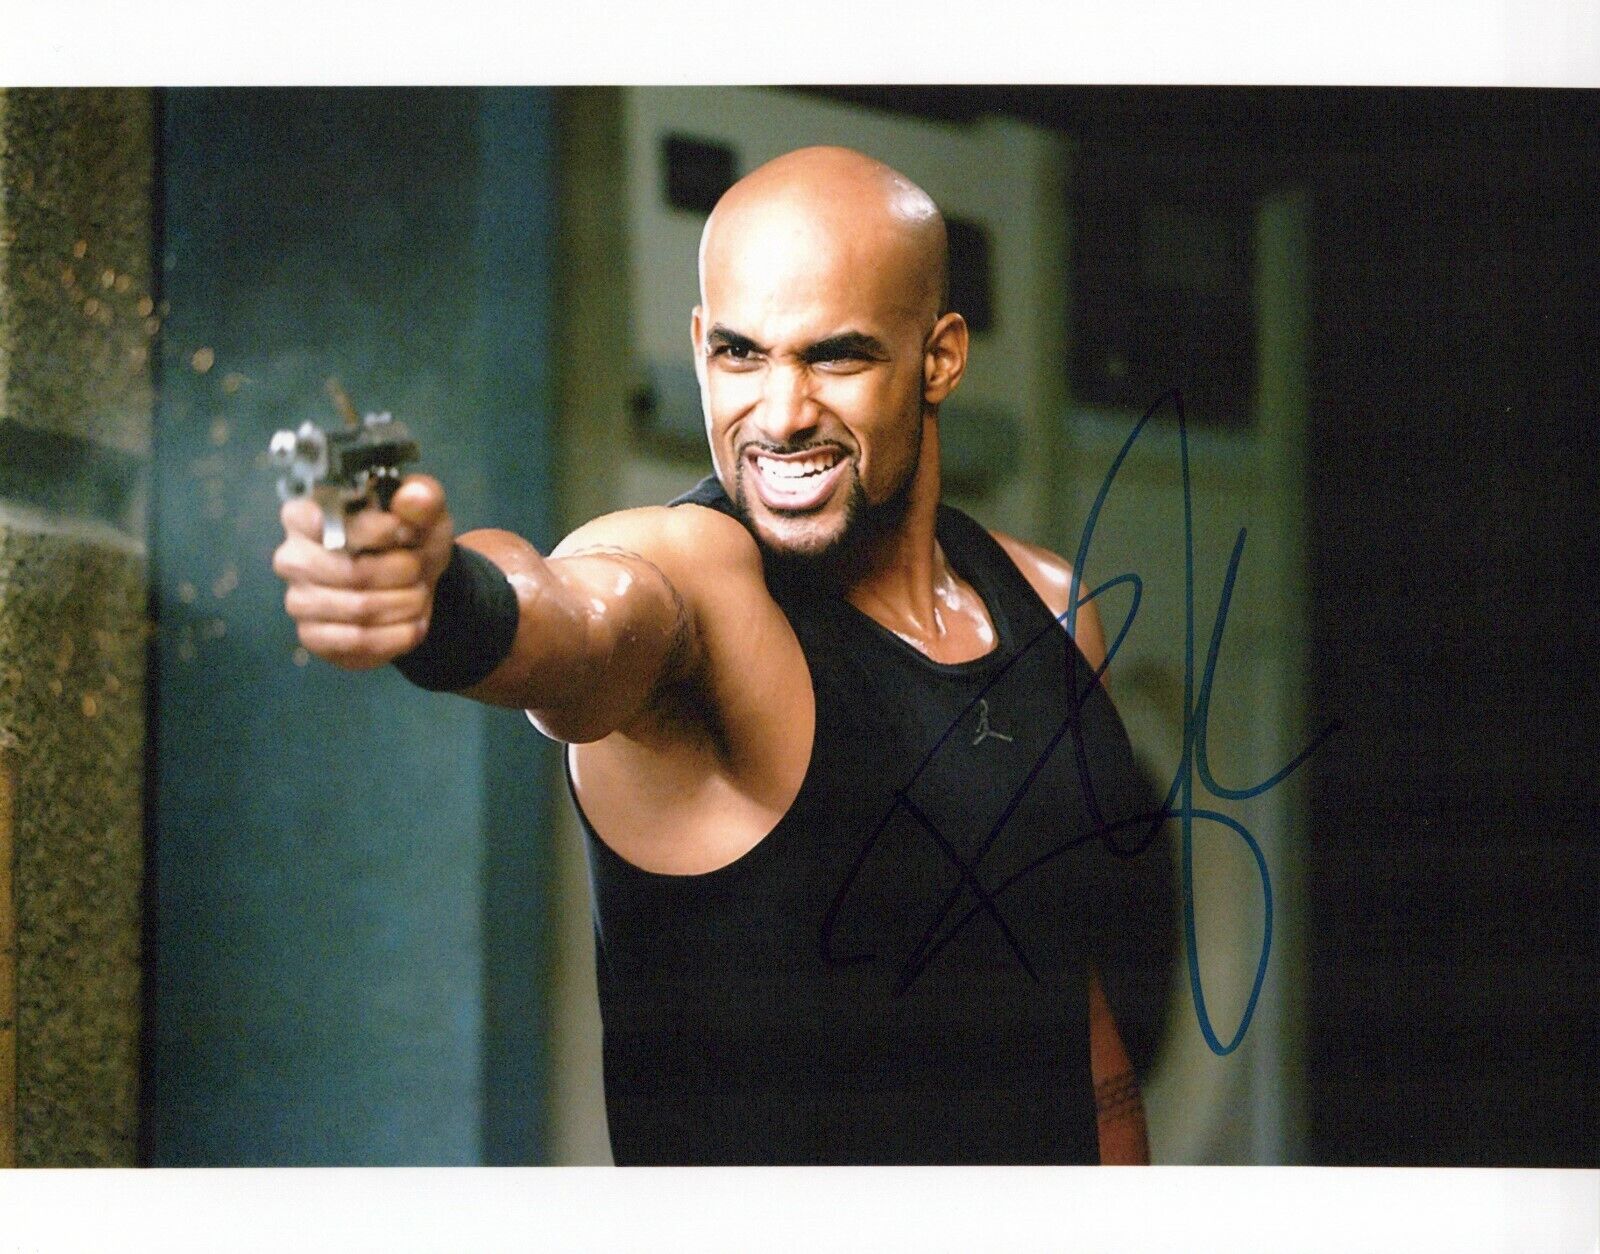 Boris Kodjoe Resident Evil Afterlife autographed Photo Poster painting signed 8x10 #7 Luther